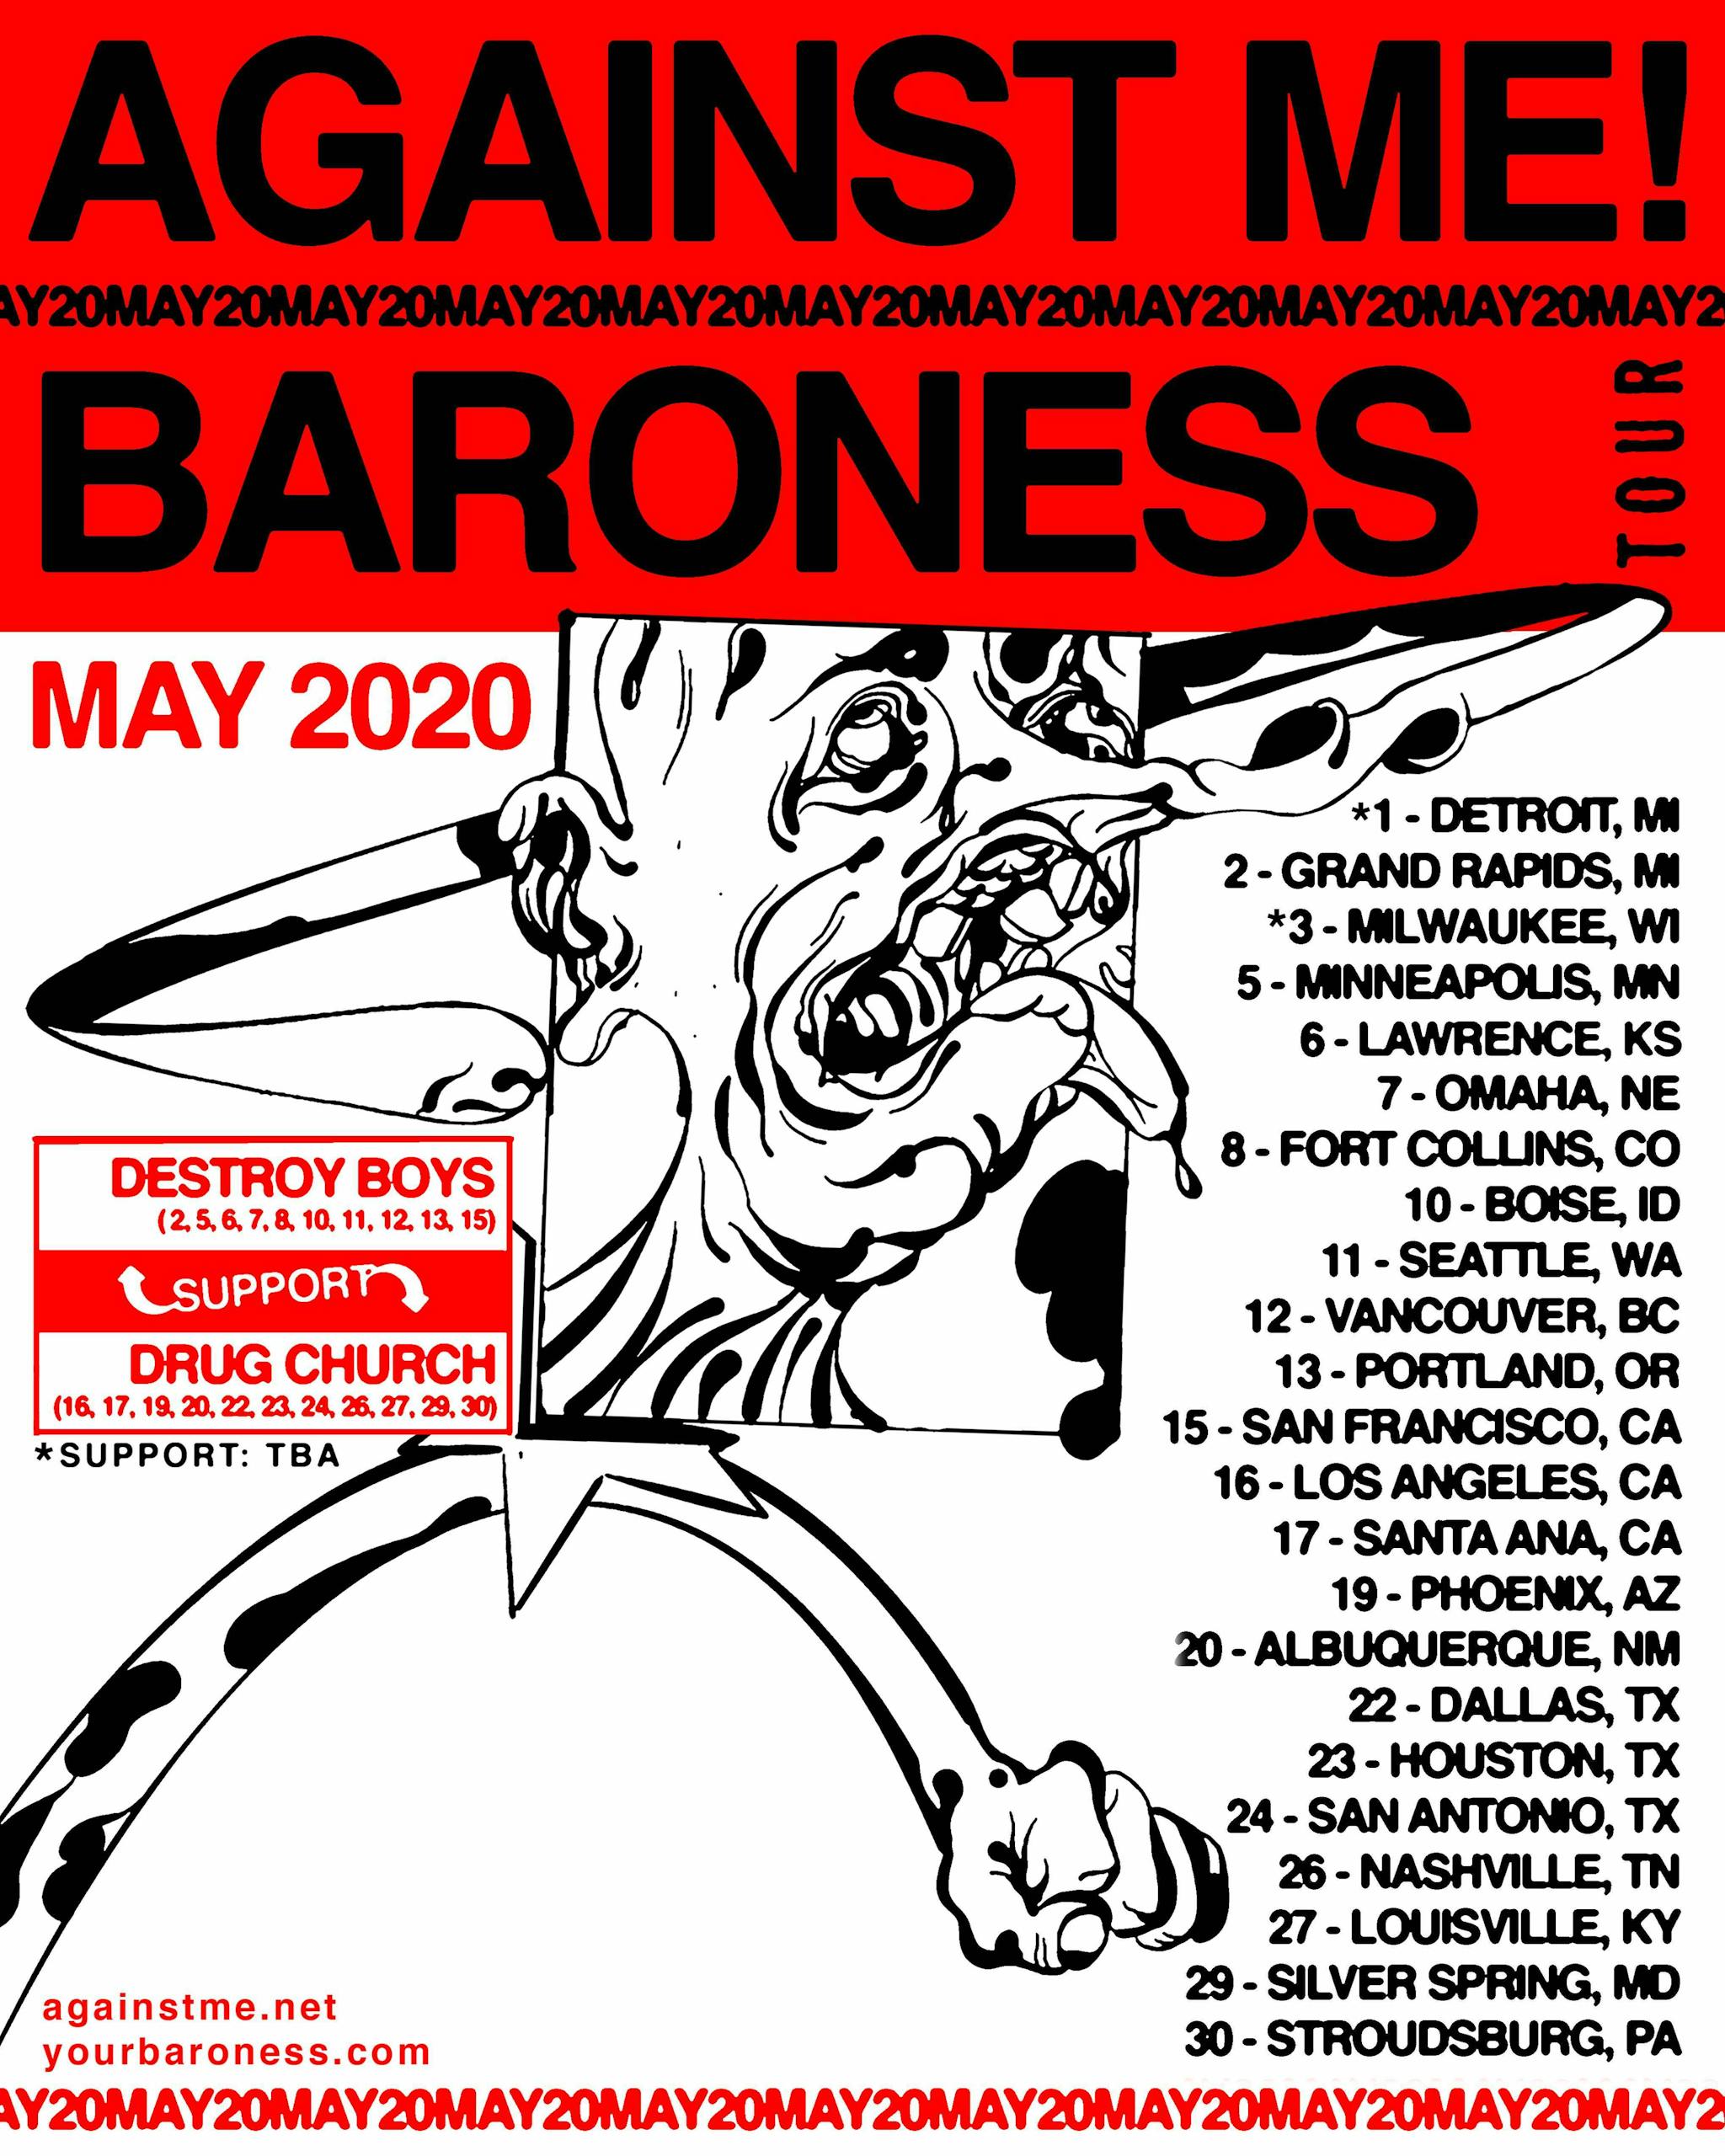 Against Me Baroness Co Headlining 2020